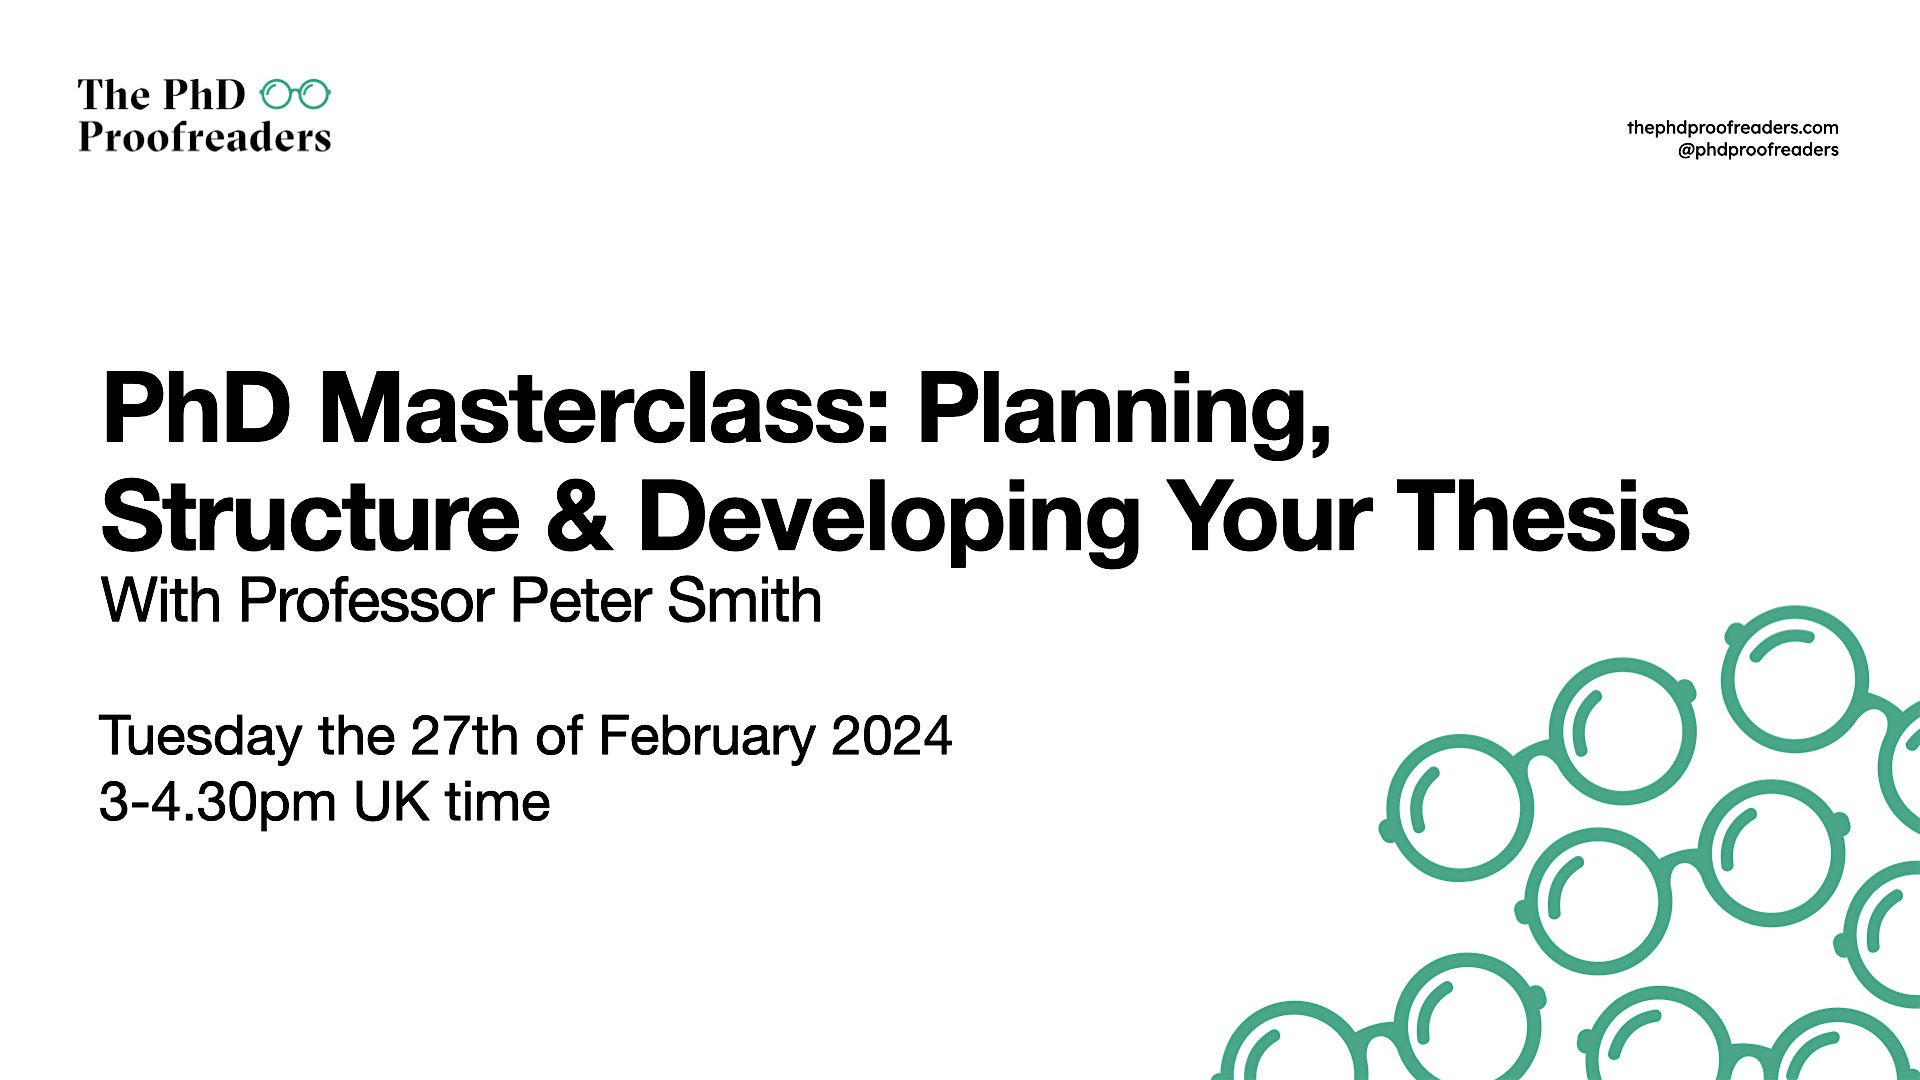 PhD Masterclass: Planning, Structuring, and Developing Your Thesis